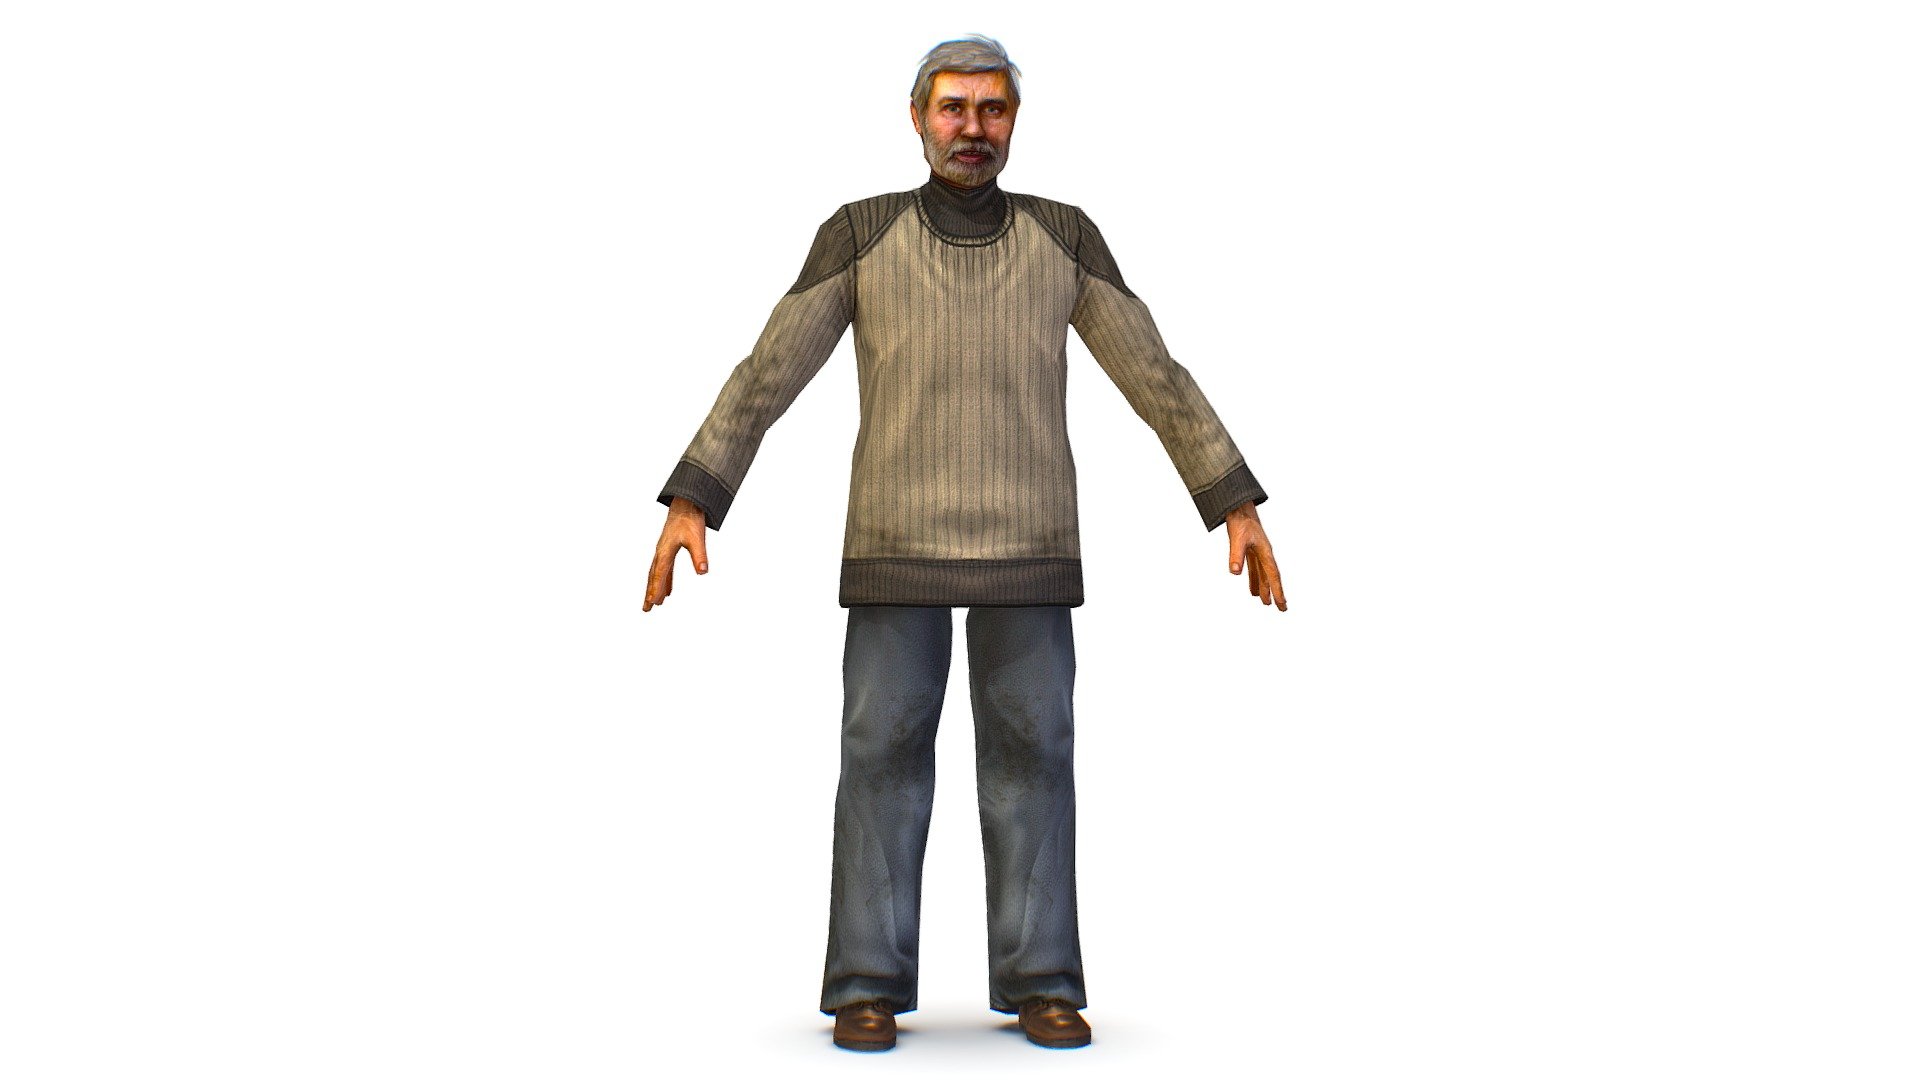 a shabby old man in an old sweater and jeans - 3dsMax file included/ texture 1024 color only 3d model